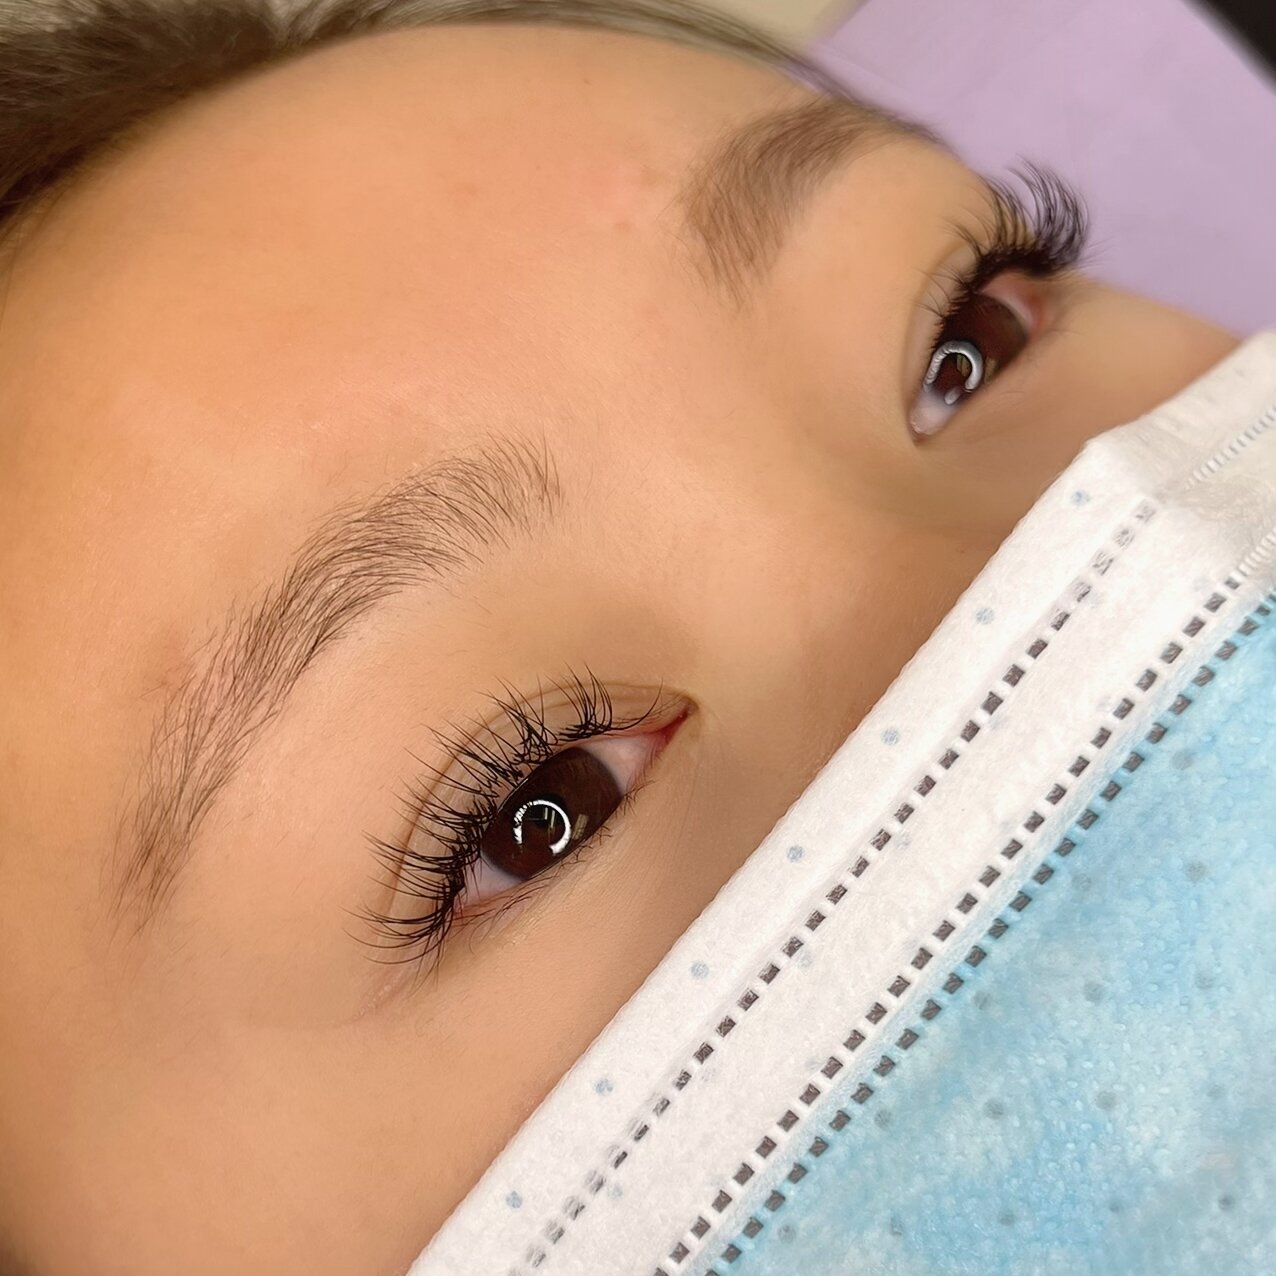 &mdash;⁠
&bull; swipe to see the before!
&bull; classic set
&bull; click the 'BOOK NOW' button in bio!
&bull; holiday specials in effect! discount applied at your appointment :)
&mdash;⁠
#oregonlashextensions #pdxlashextensions #portlandlashextension